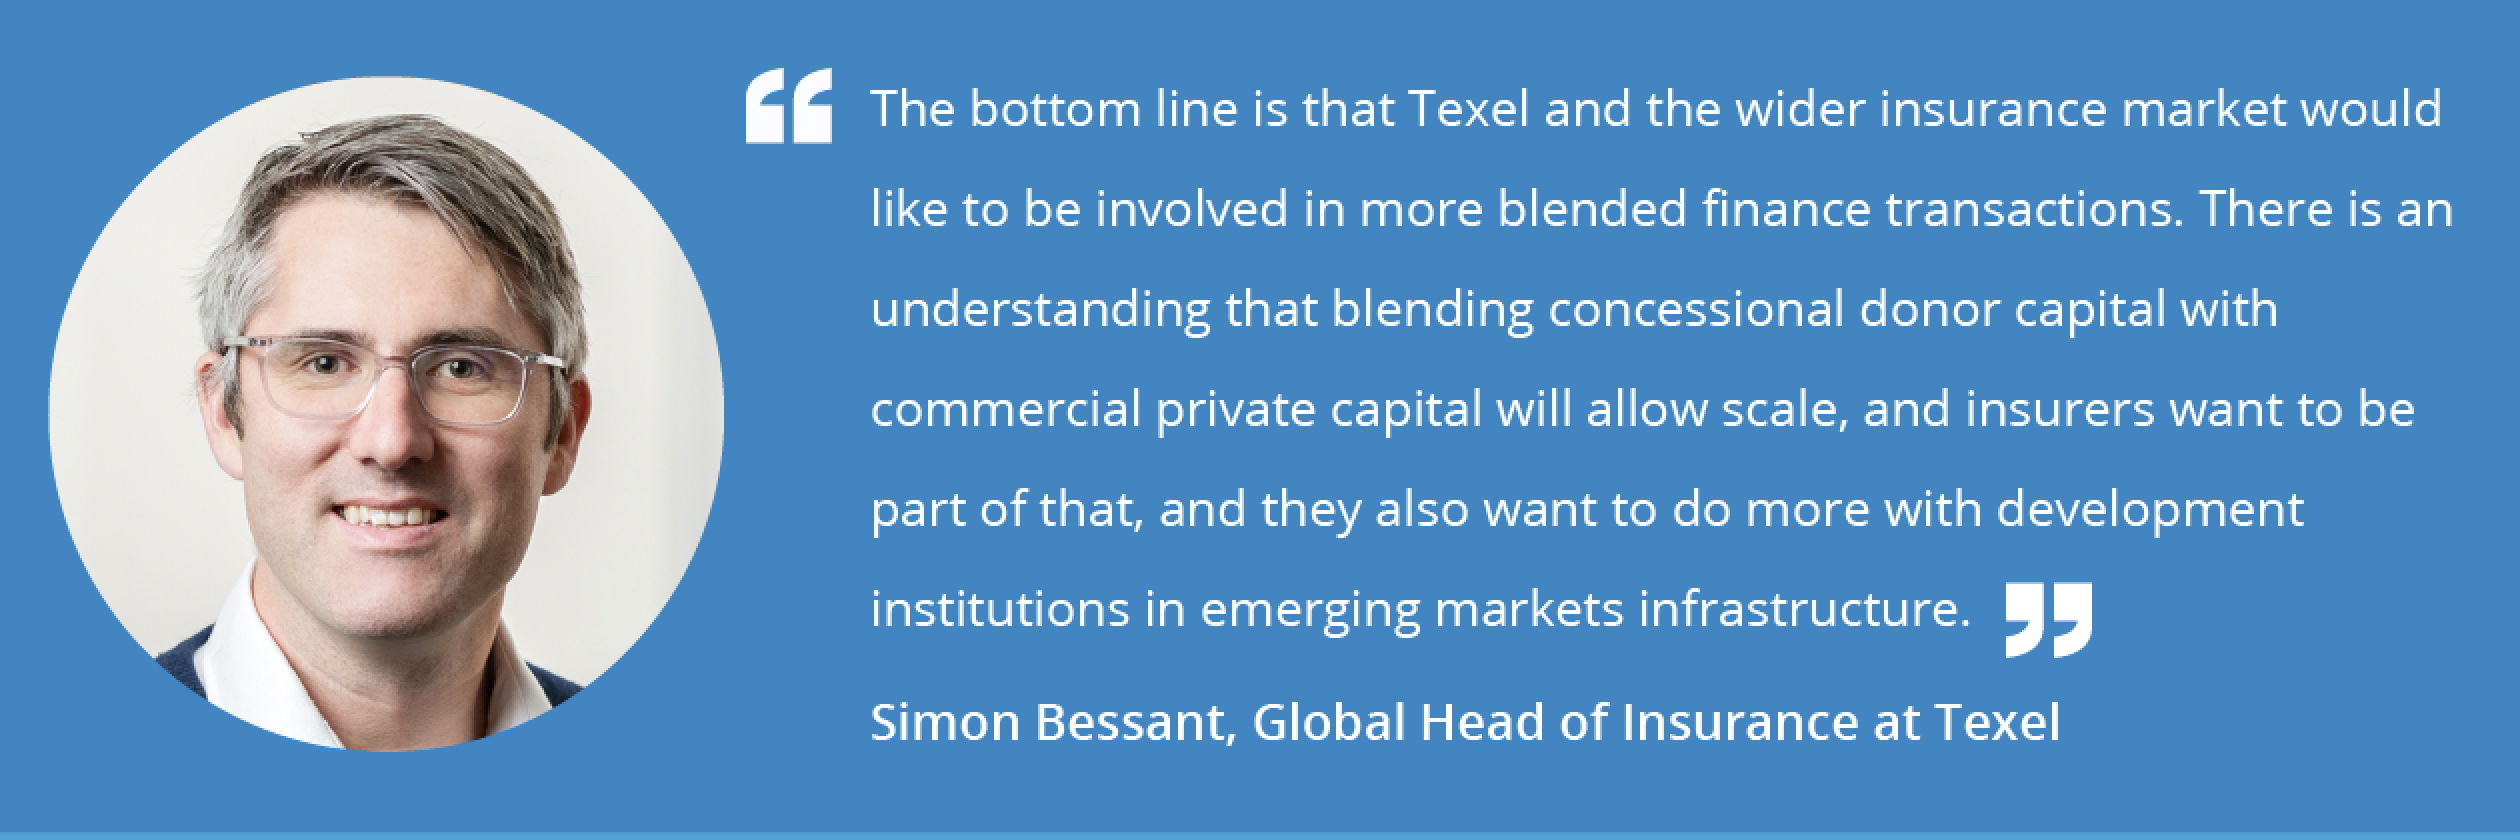 Member spotlight with Simon Bessant of The Texel Group